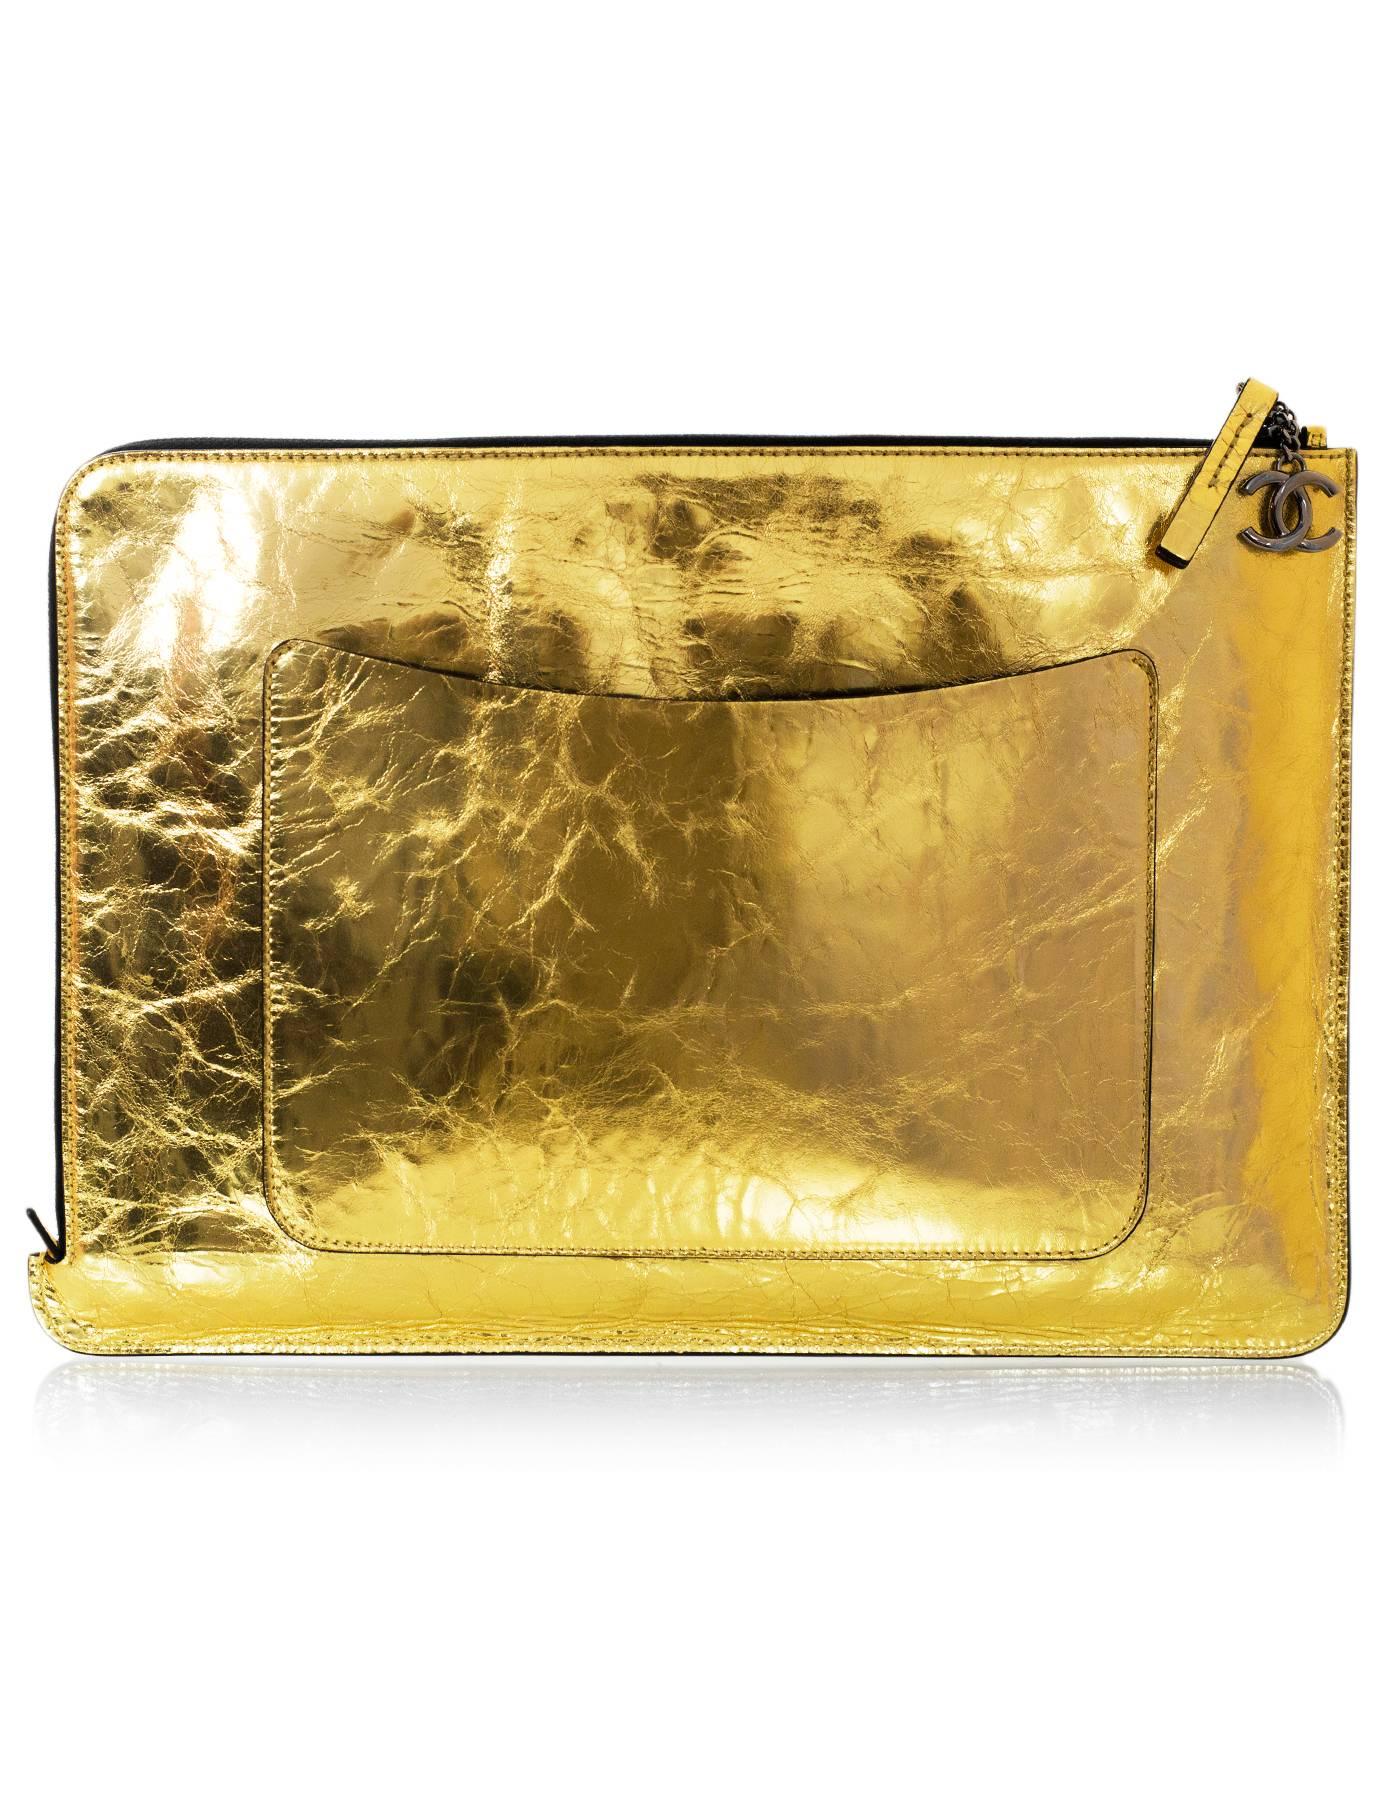 Chanel 2015 Gold Crinkled Leather Large Feminist Mais Feminine Clutch Bag In Excellent Condition In New York, NY